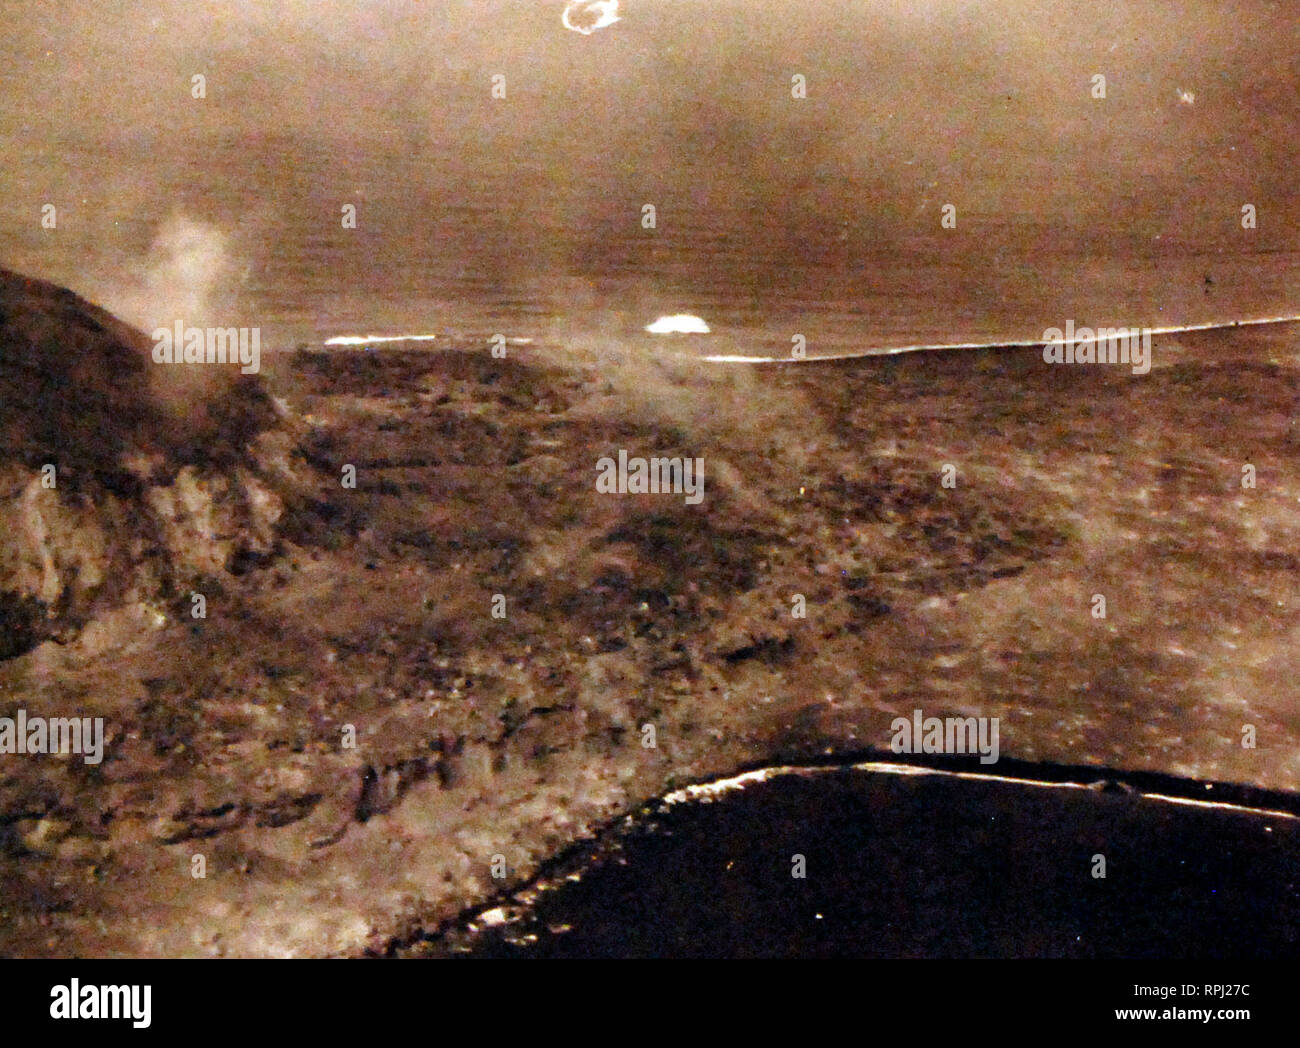 Battle for Iwo Jima, February-March 1945. Mt. Suribachi on Iwo Jima. Damage inflicted by naval gunfire and aerial bombardment can be seen along bluff and on beach. Photographed by plane from USS Makin Island (CVE 93) on D-Day, February 19, 1945. Stock Photo